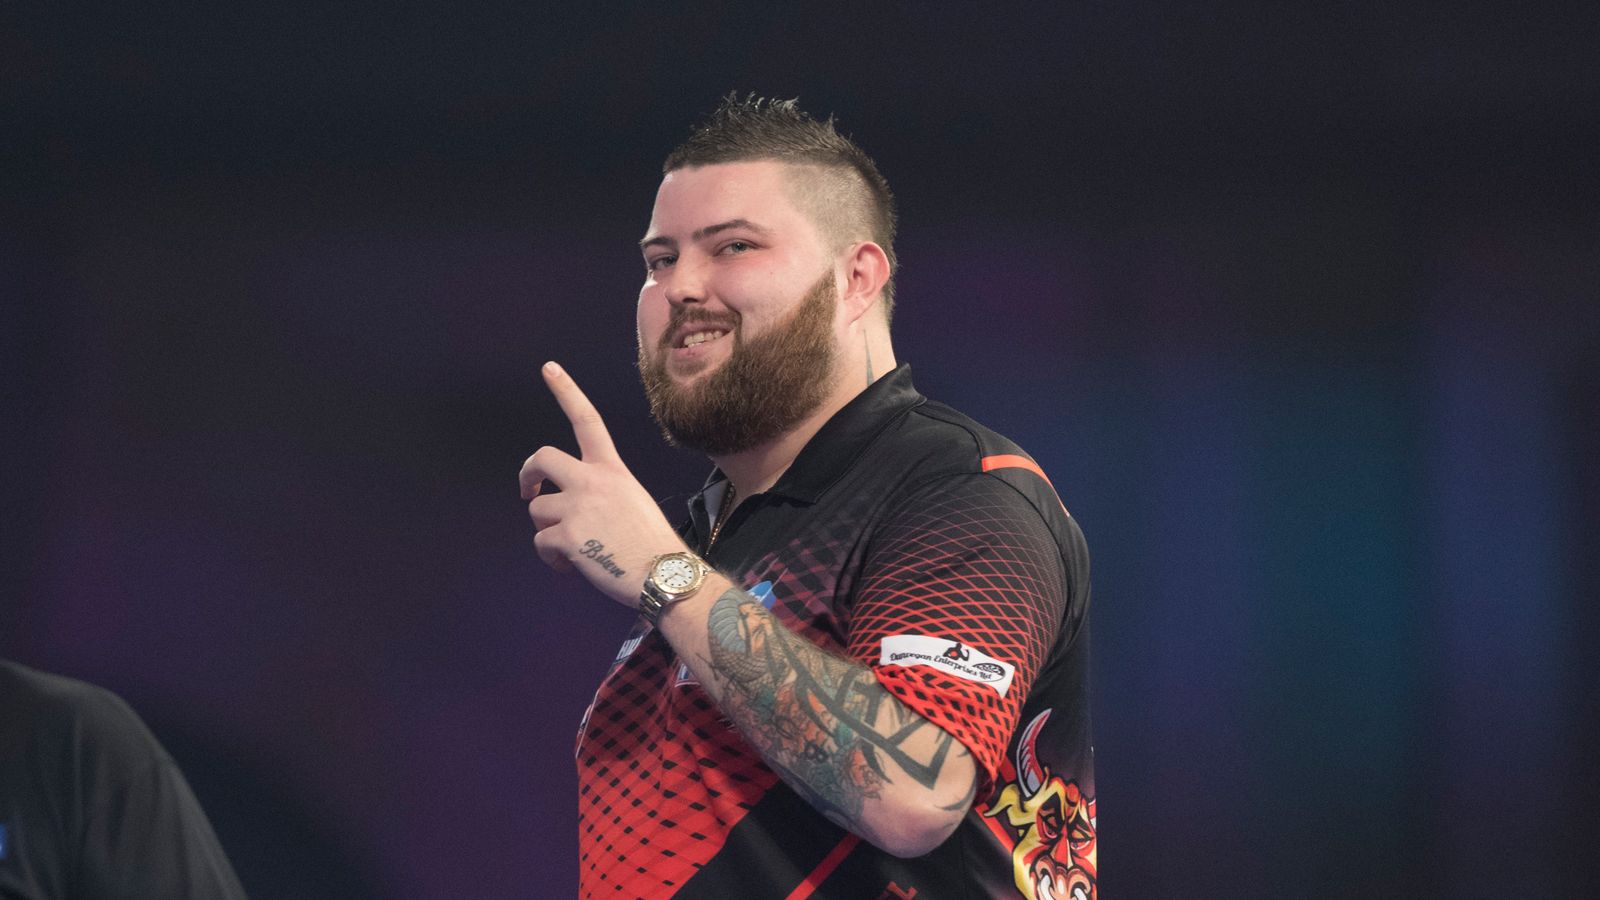 Michael Smith will play Premier League Darts in Exeter